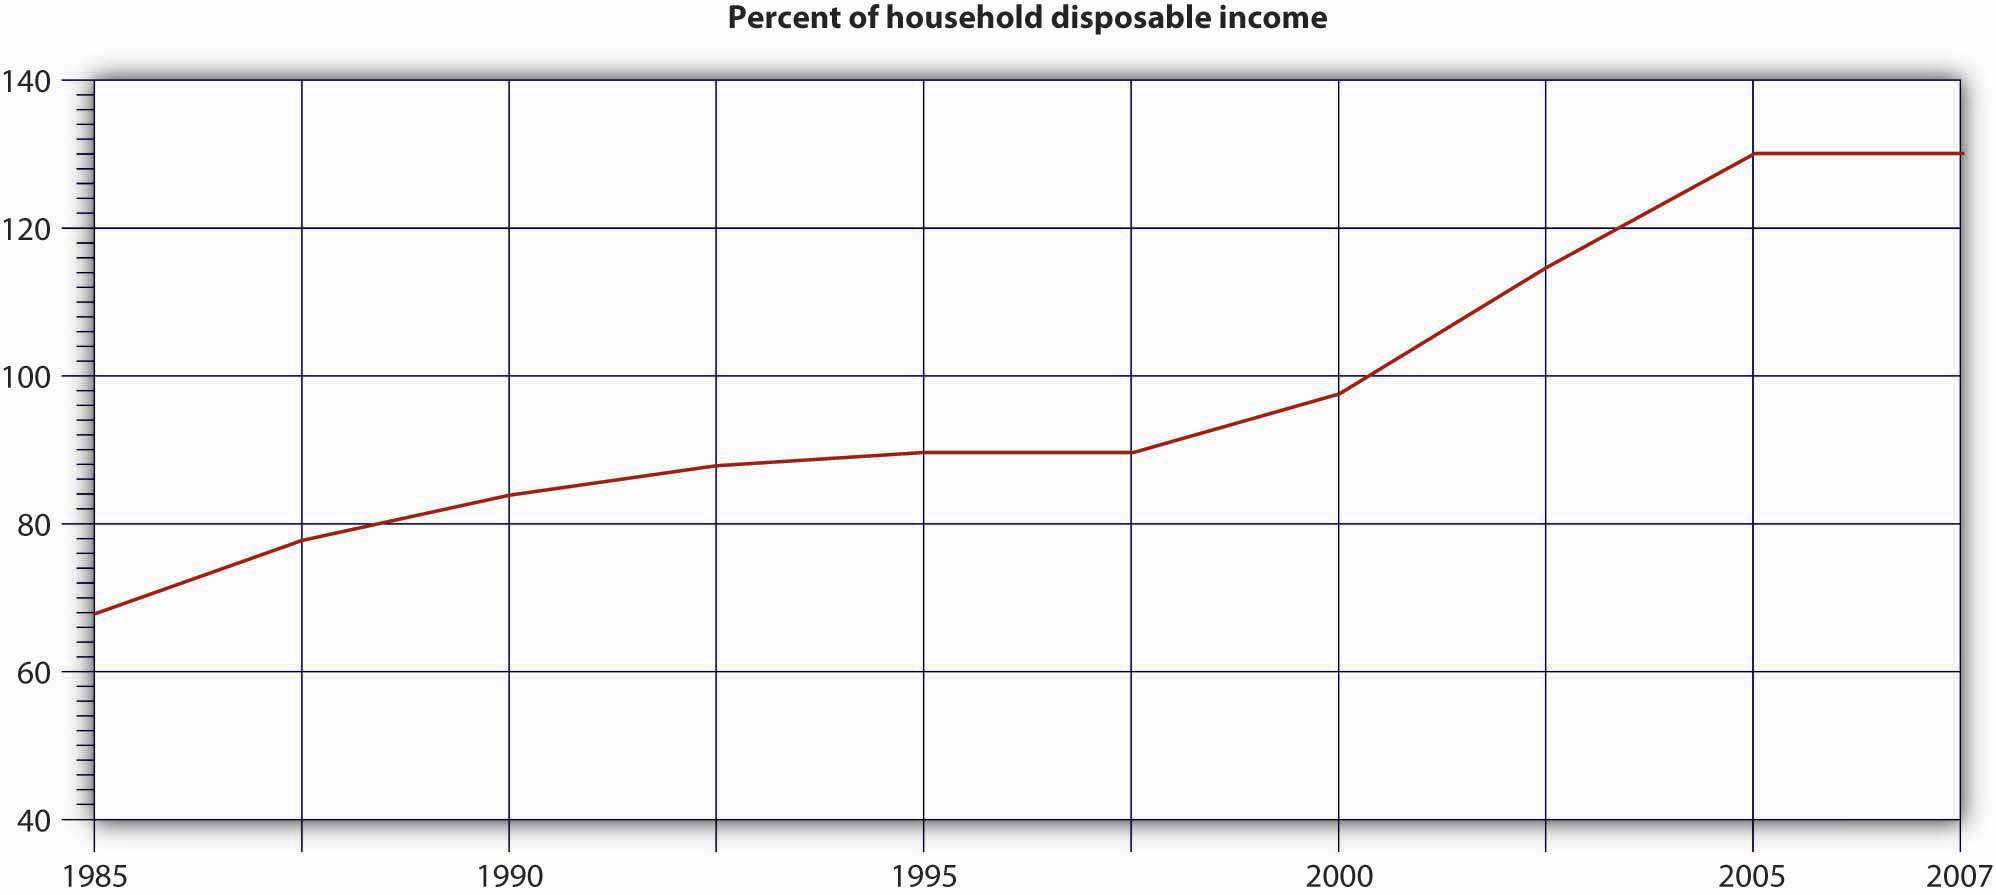 Increase in the ratio of debt to disposable income among American households between 1985 and 2007. Y-axis represents the percent of disposable income and the x-axis represents years.